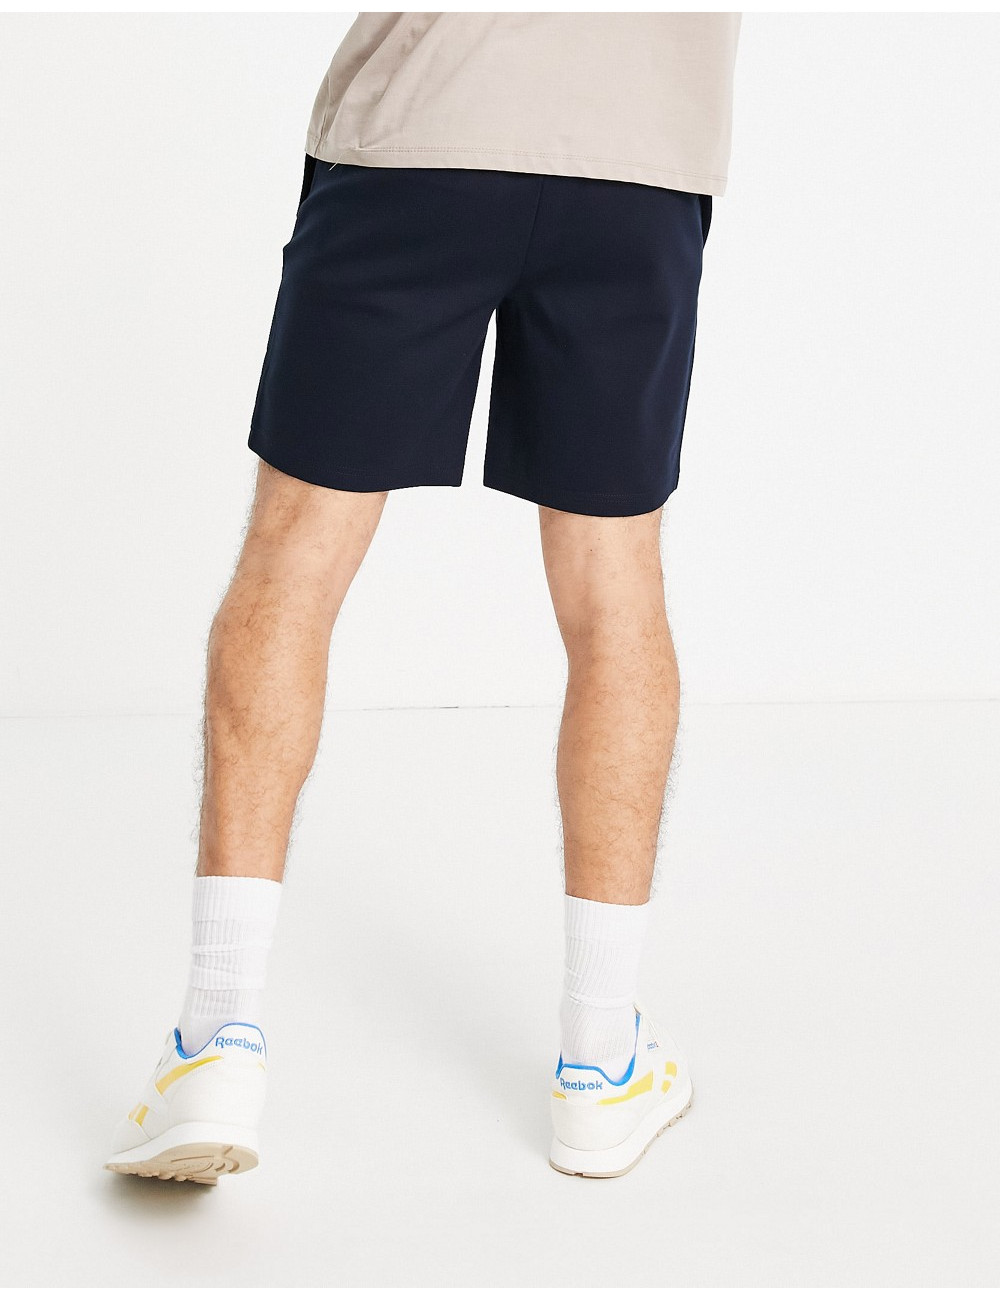 River Island shorts in navy